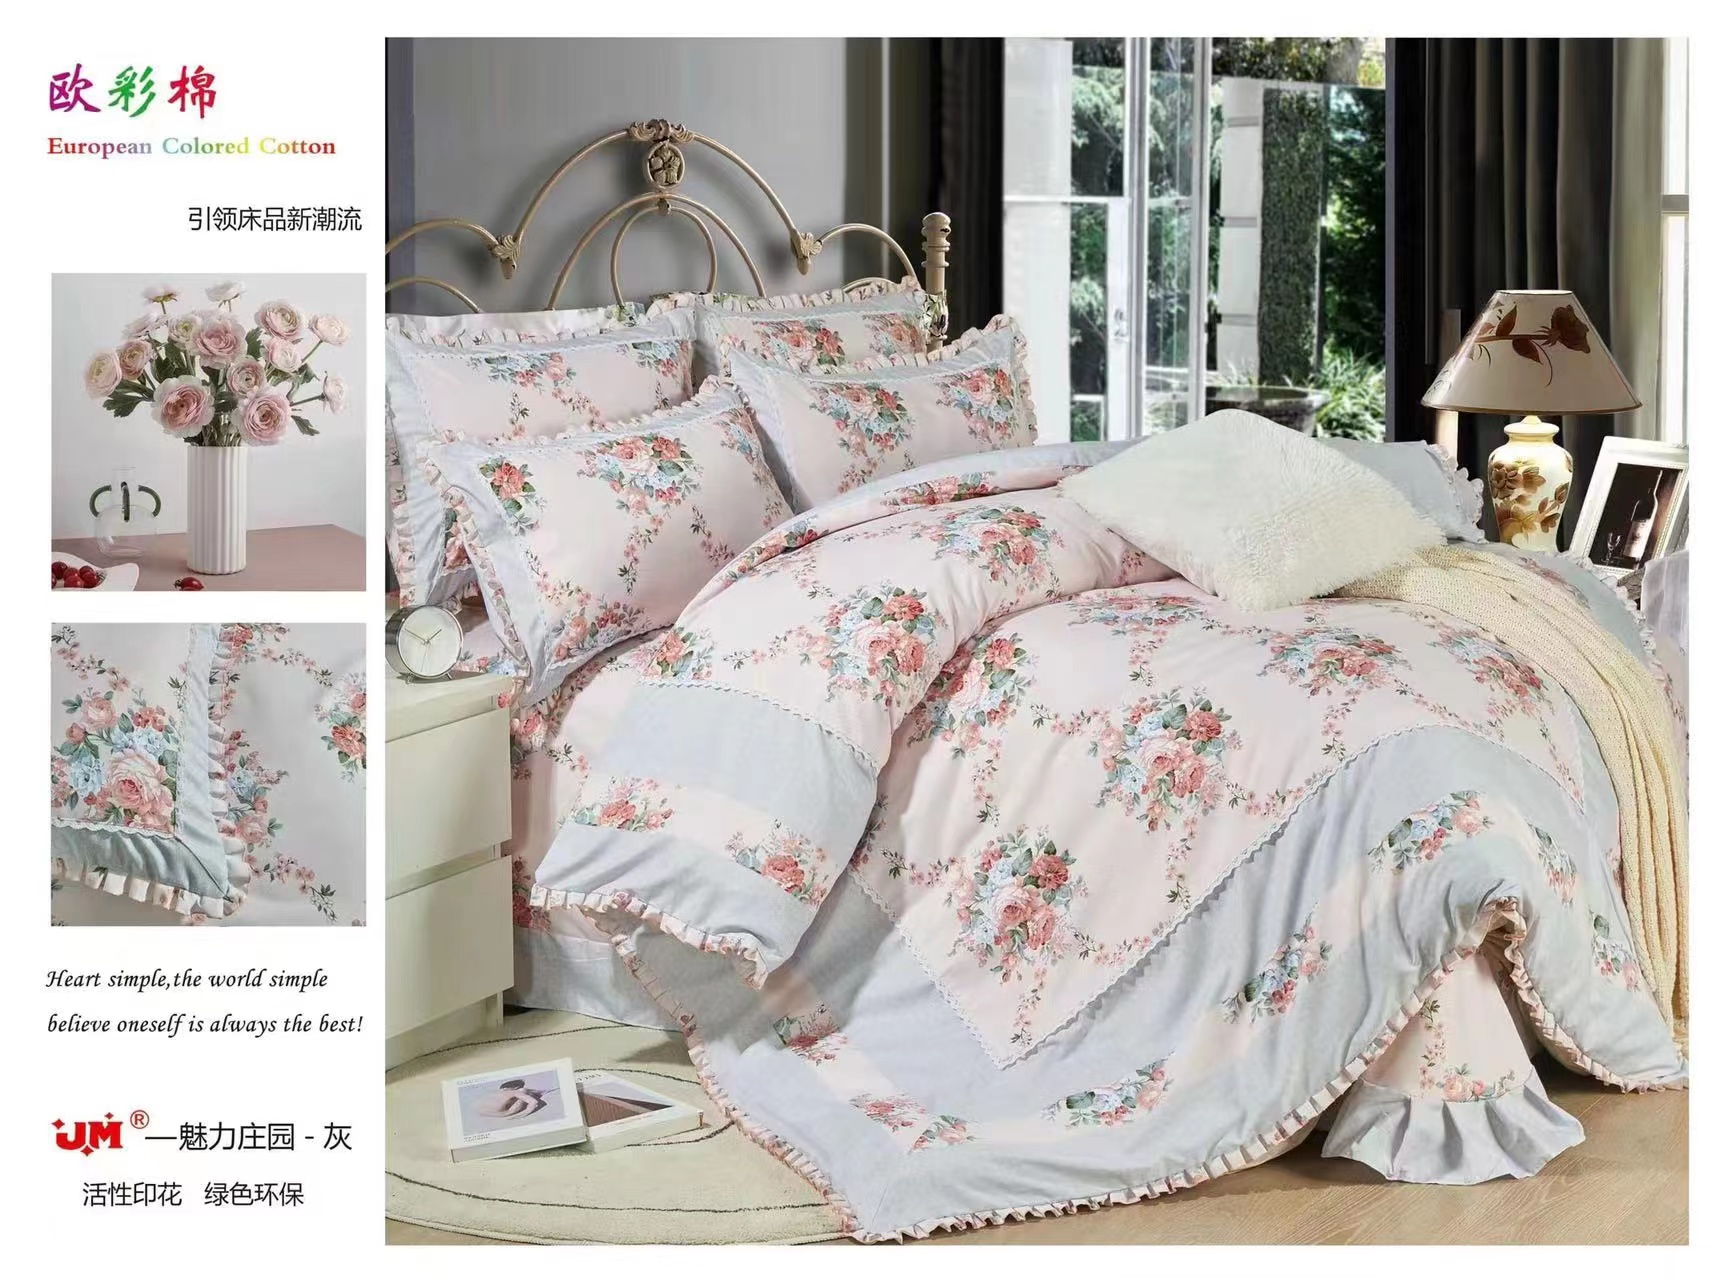 four-piece-bedding-setkorean-style-with-edges-charming-manor-gray2021-b013603